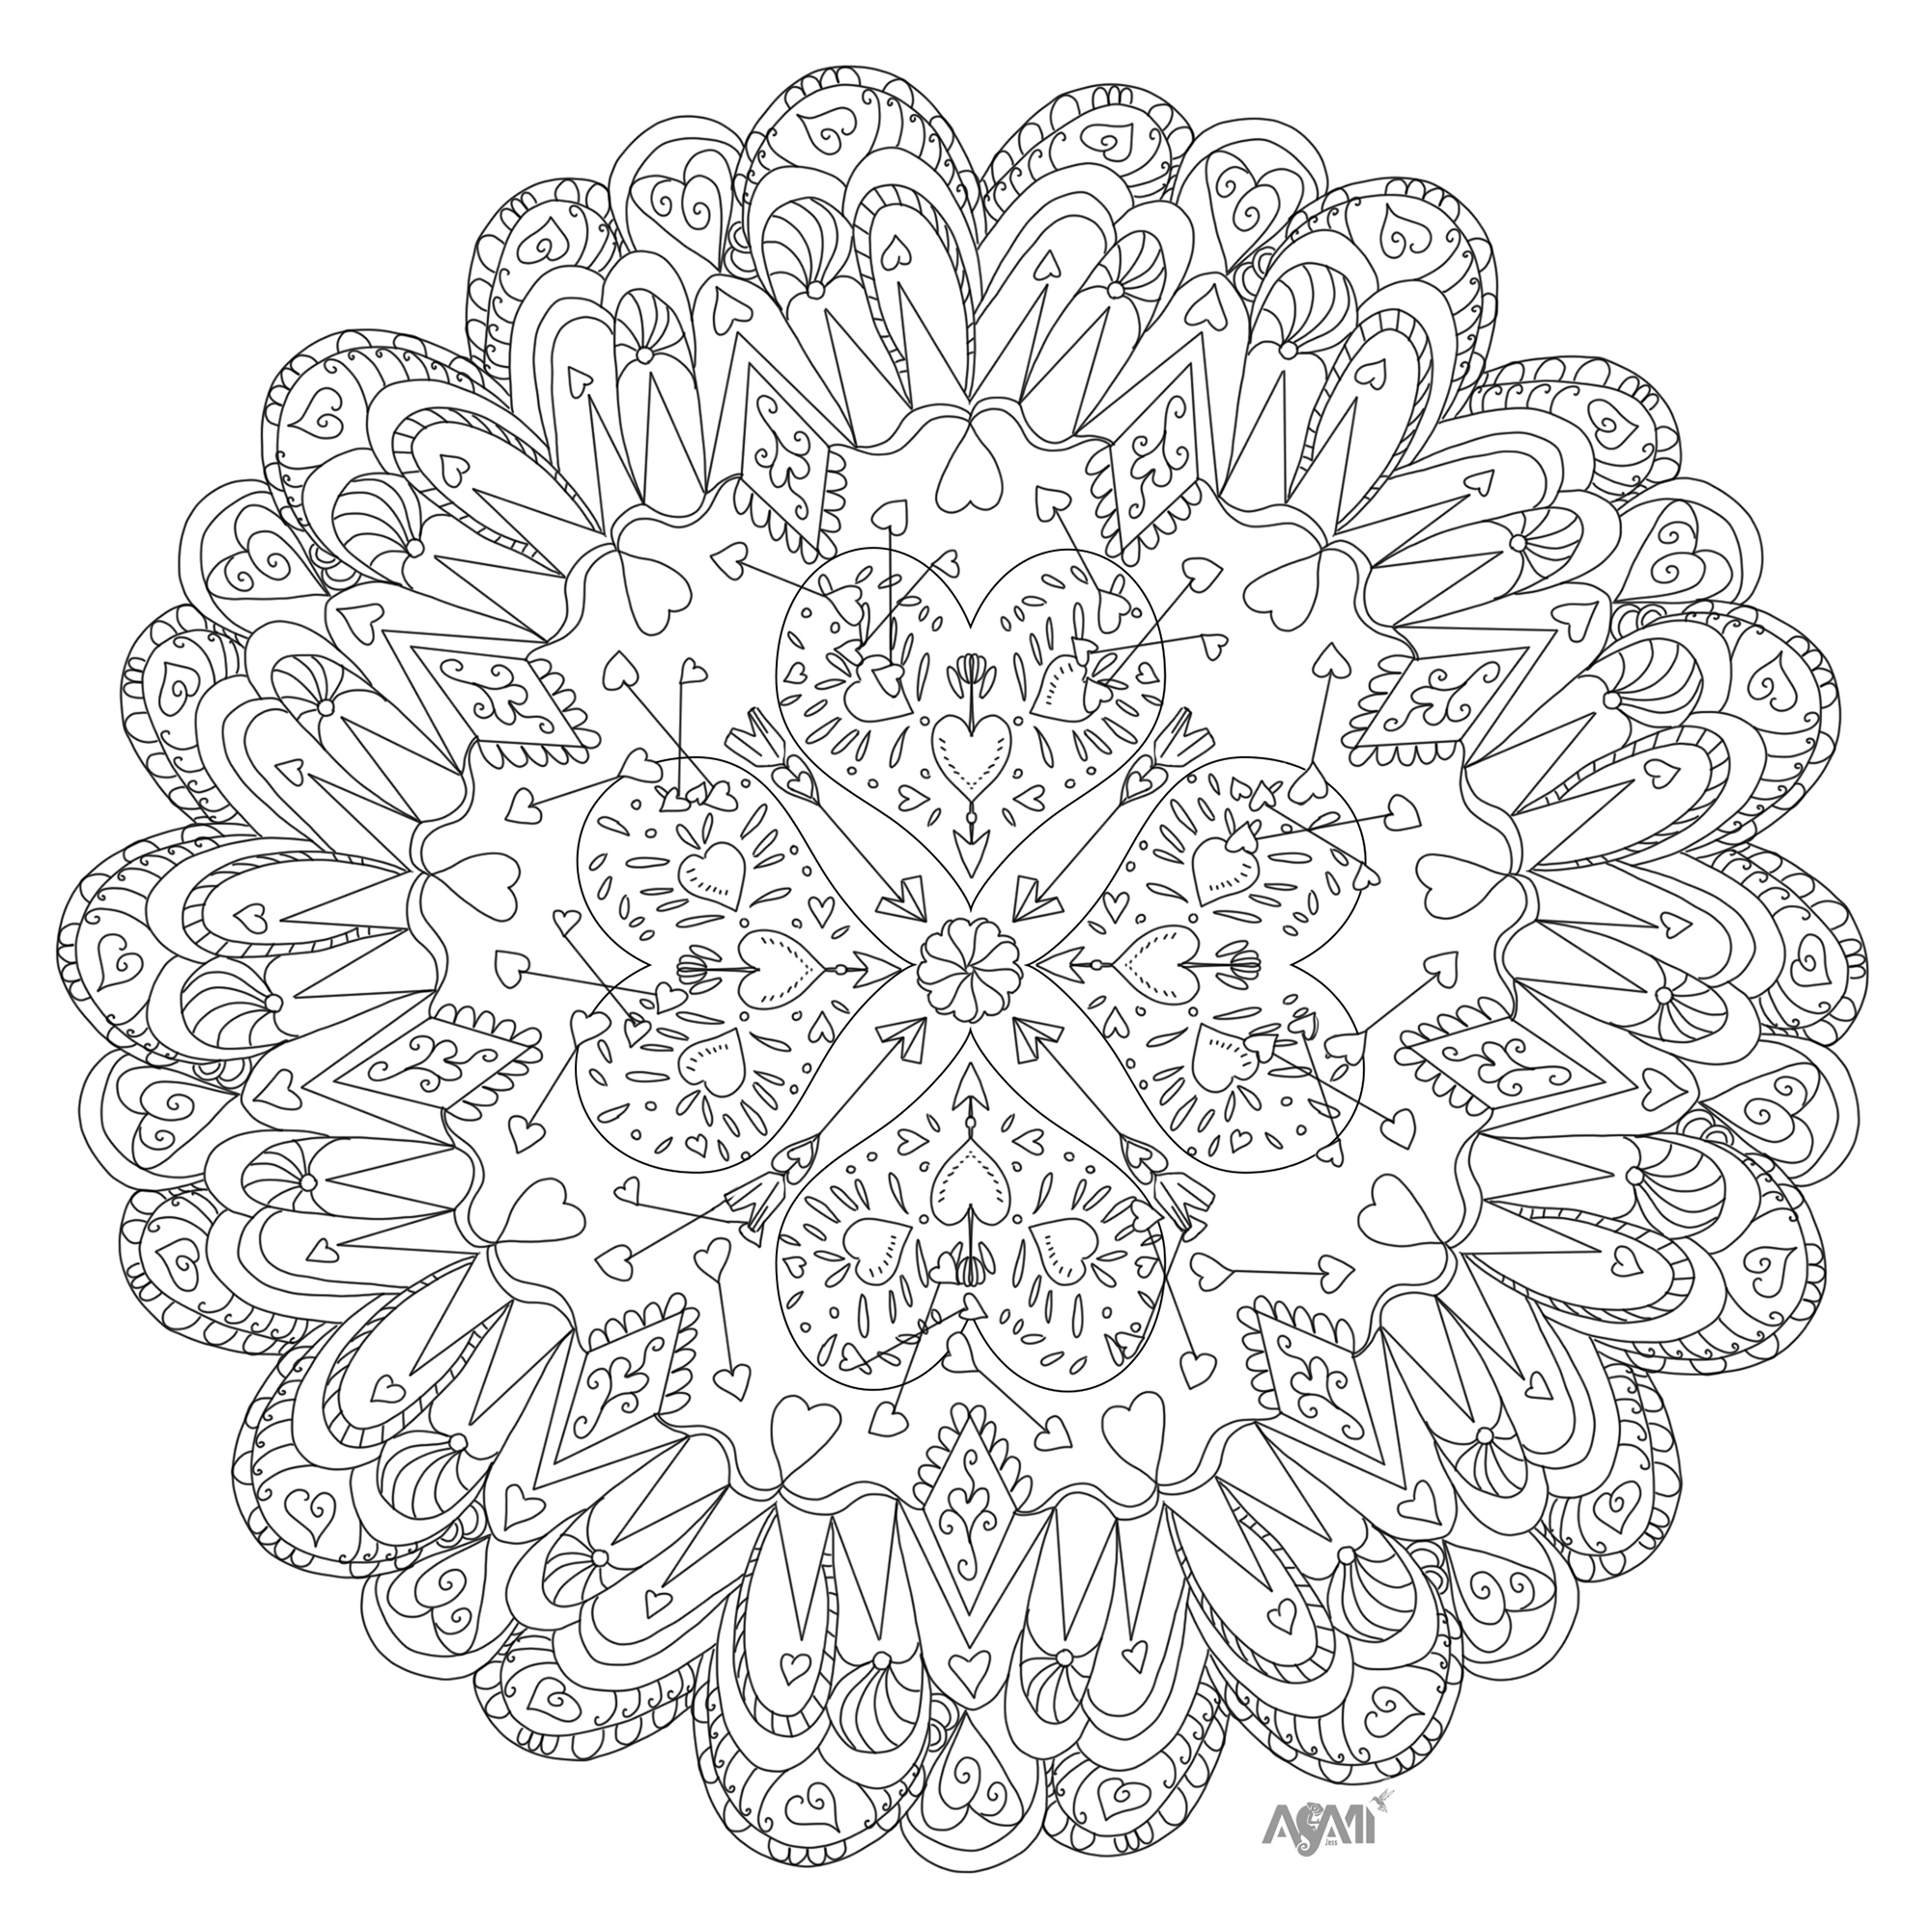 Mandala with hearts and intricate designs, Artist : Jessica Masia